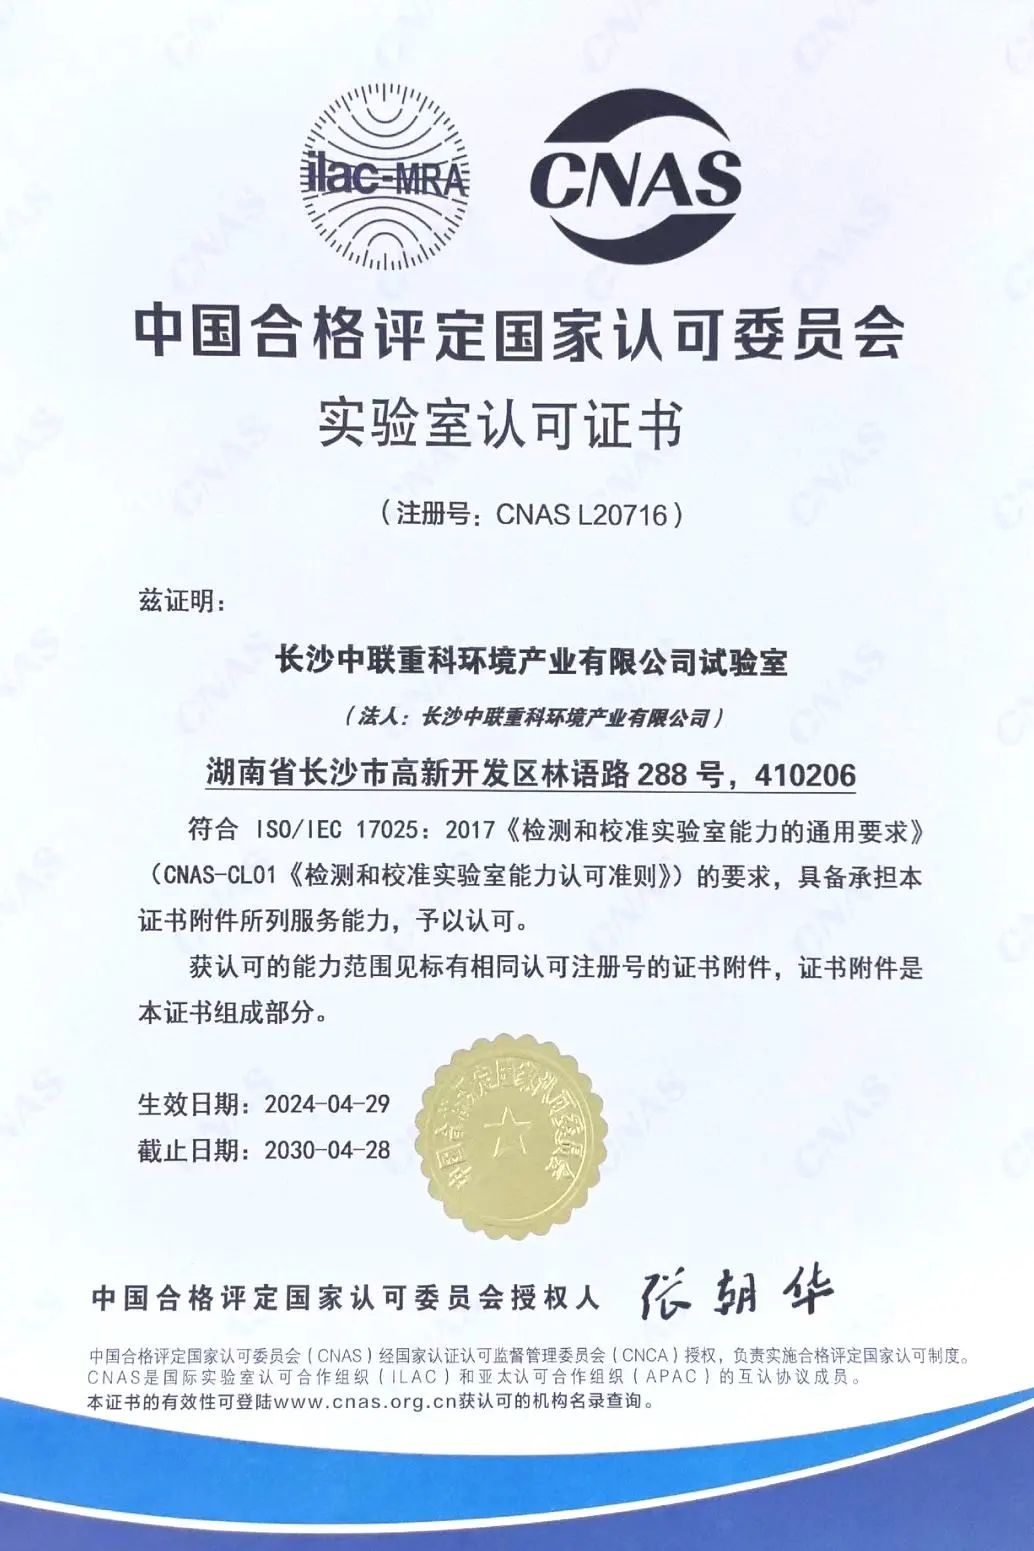 Industry's first Yingfeng environment passed CNAS laboratory certification